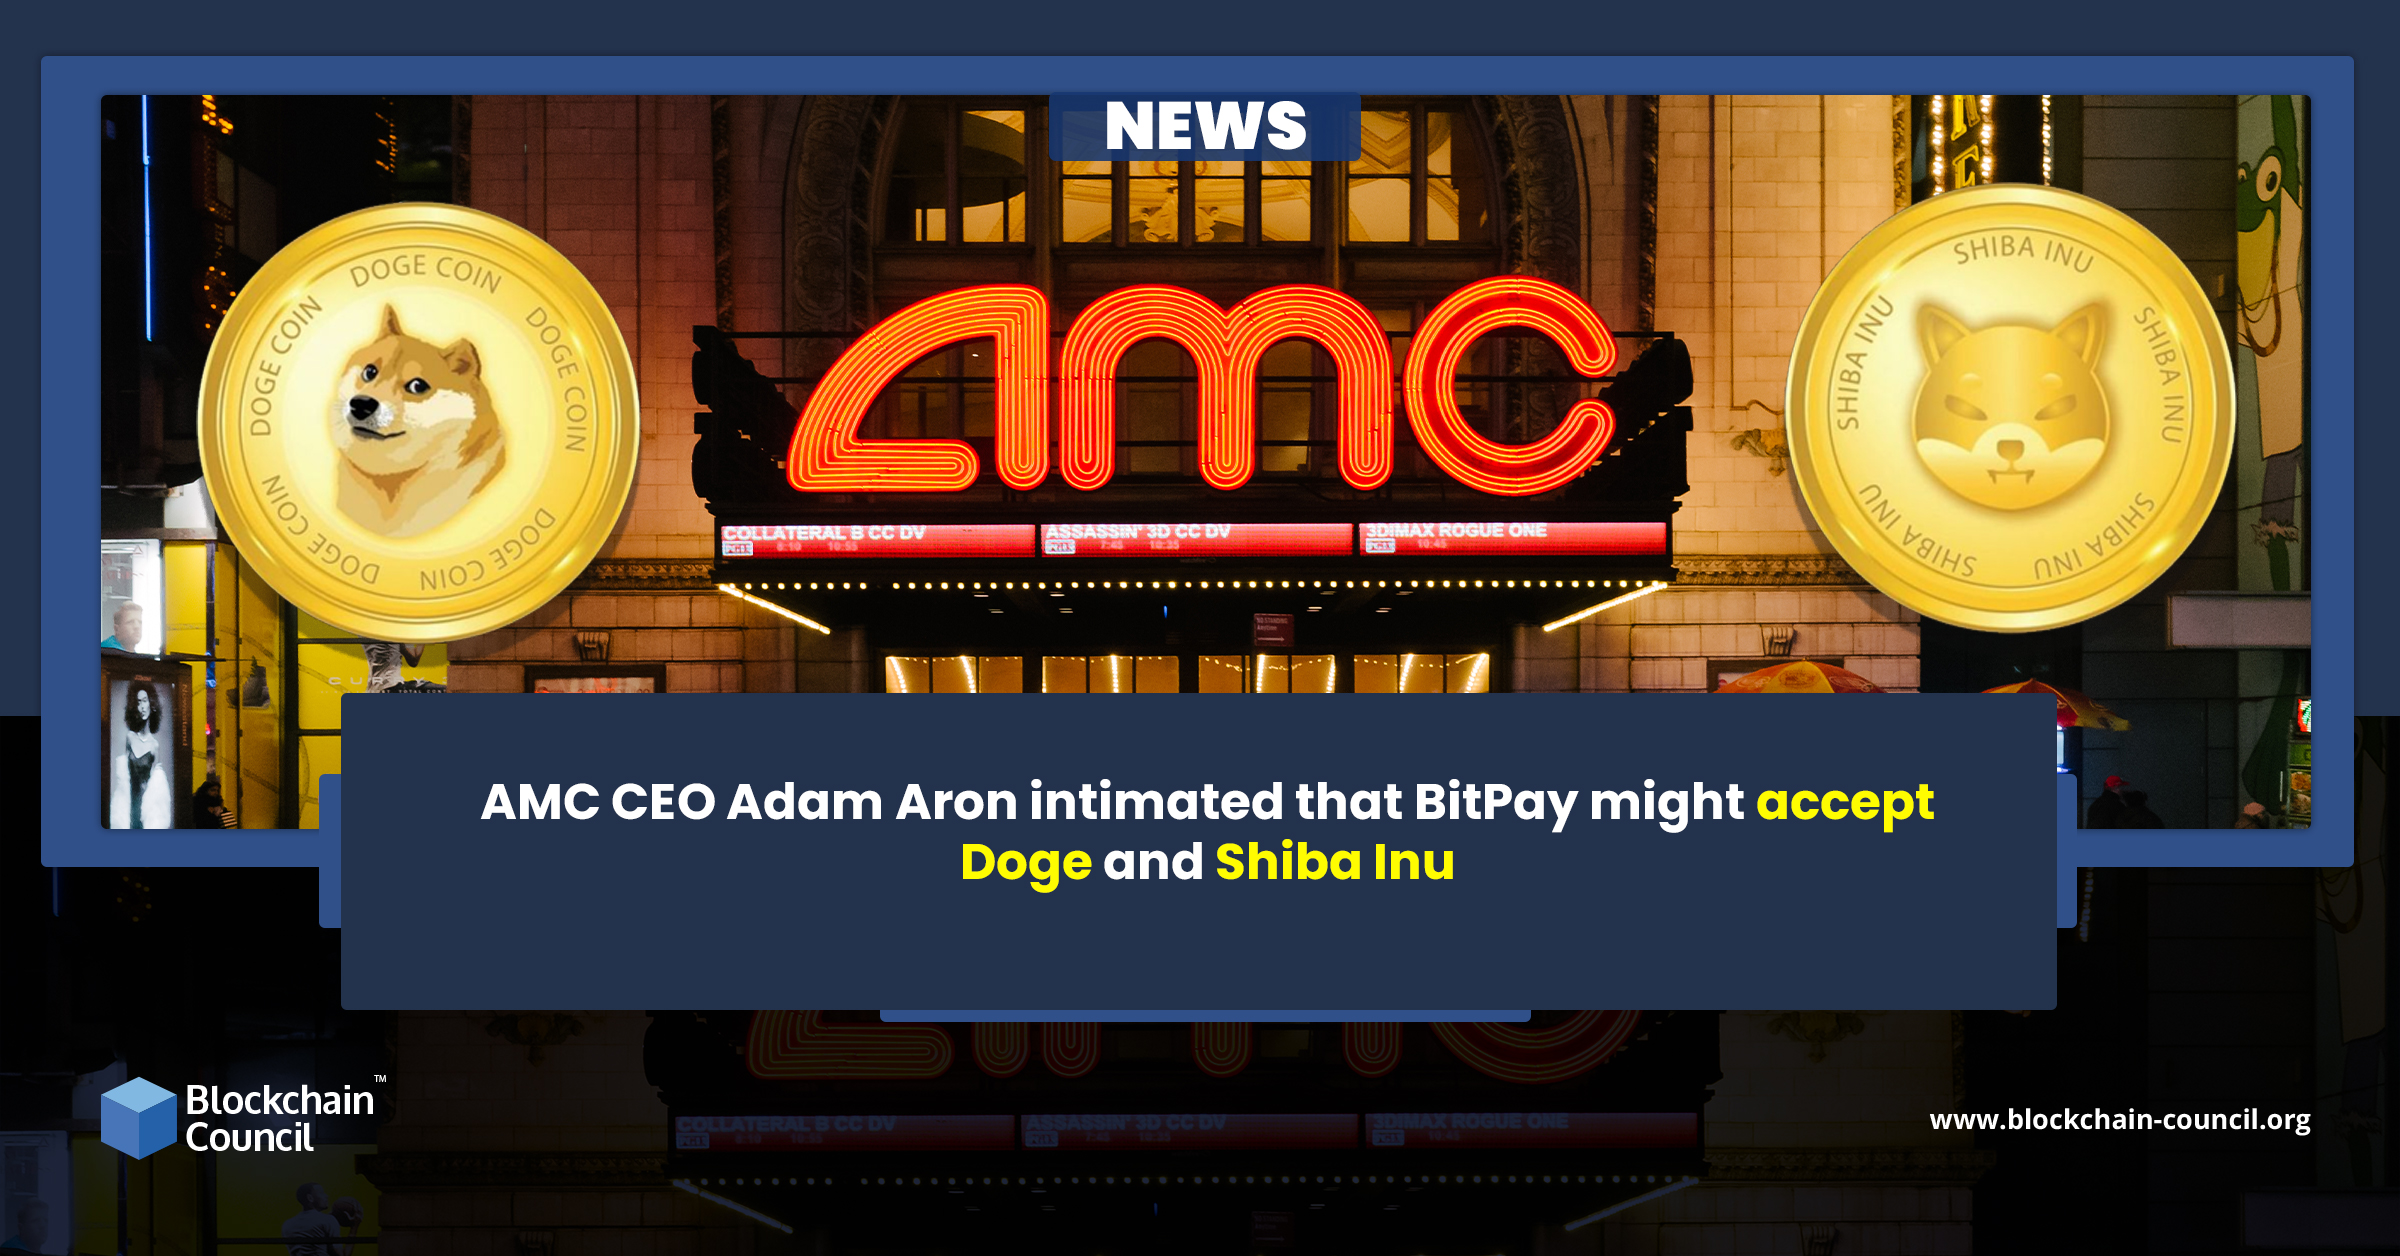 AMC CEO Adam Aron intimated that BitPay might accept Doge and Shiba Inu